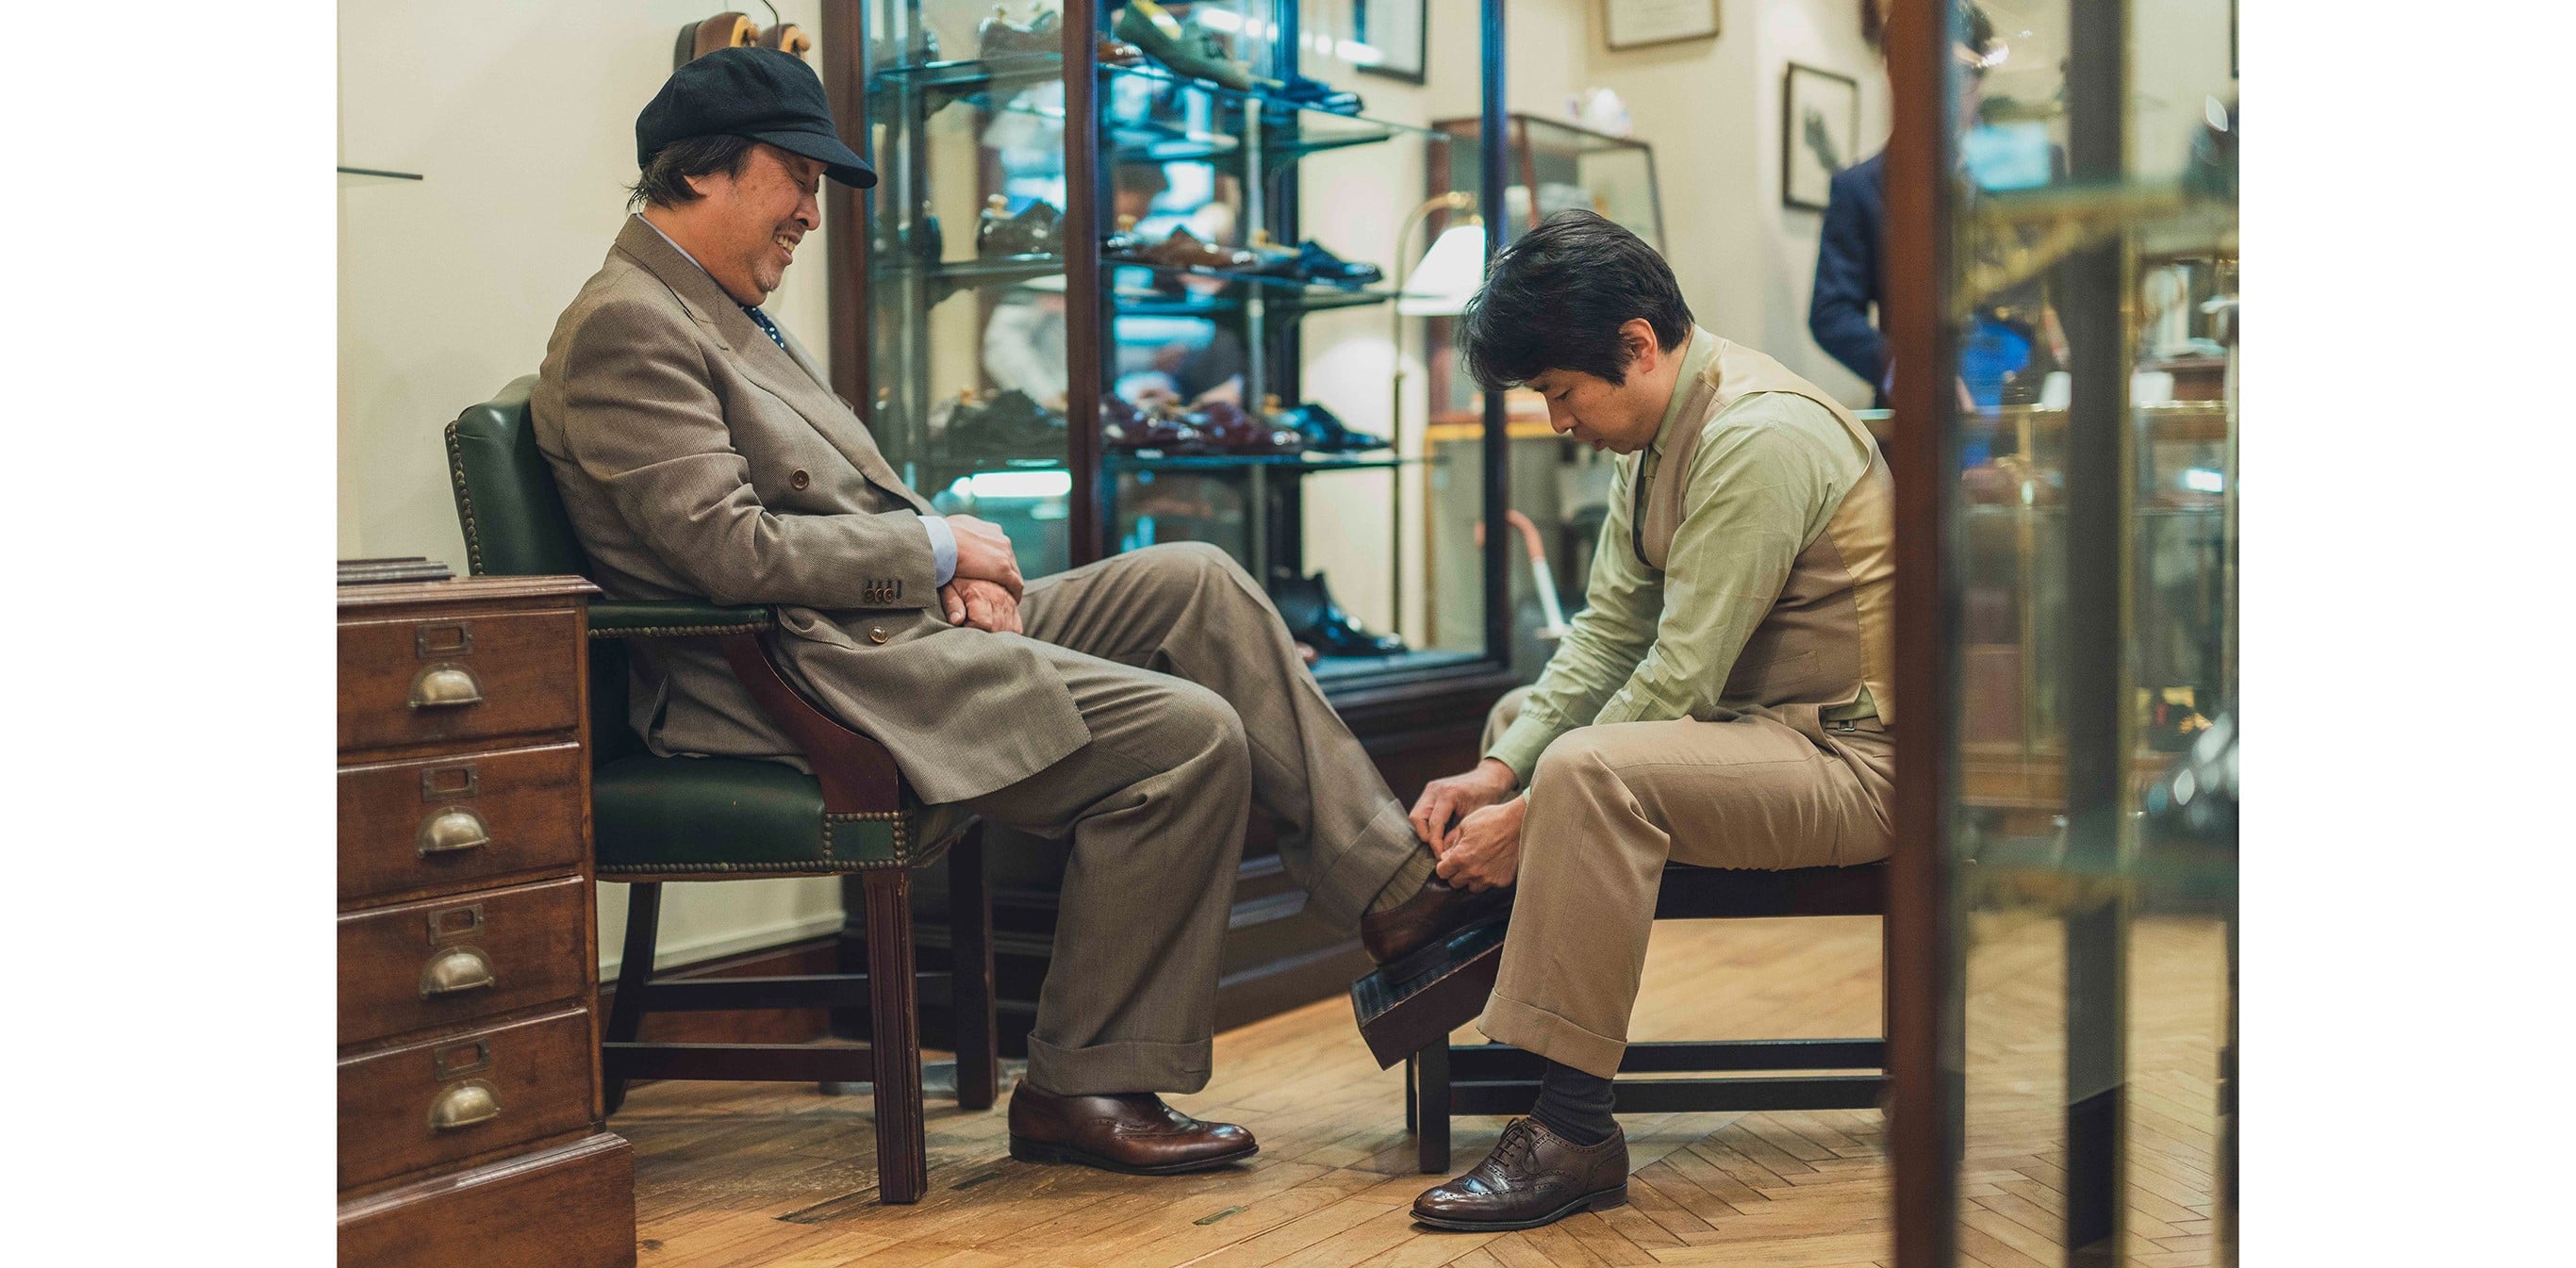 Admiring the beloved English Leather Shoes at “Lloyd Footwear Ginza”, the shoe store opened until 10PM